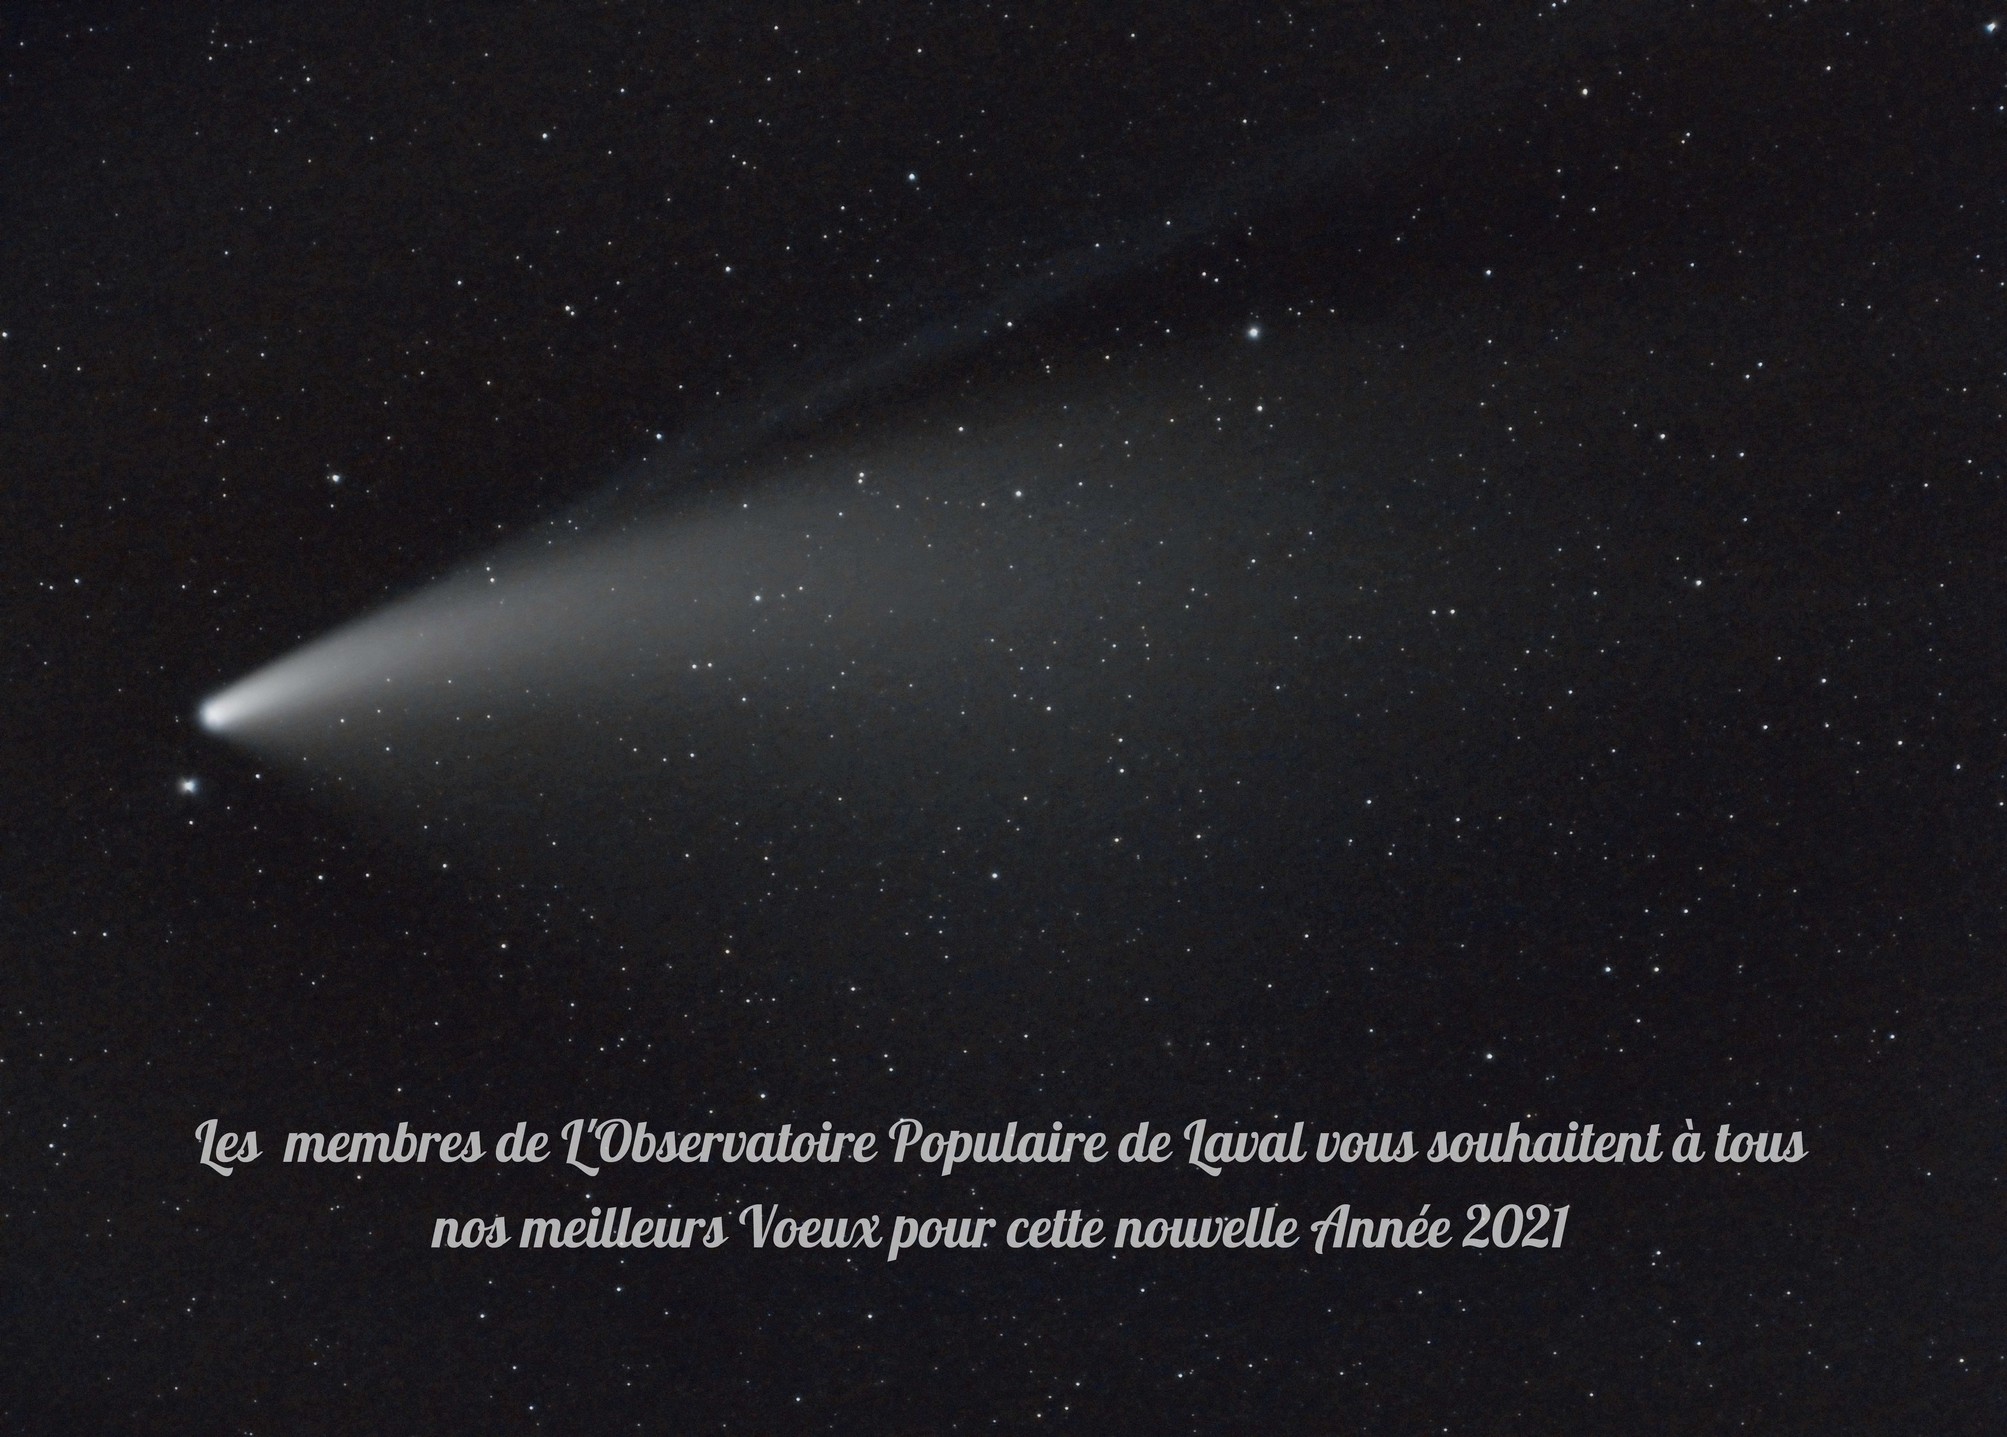 Neowise voeux OPL 2021